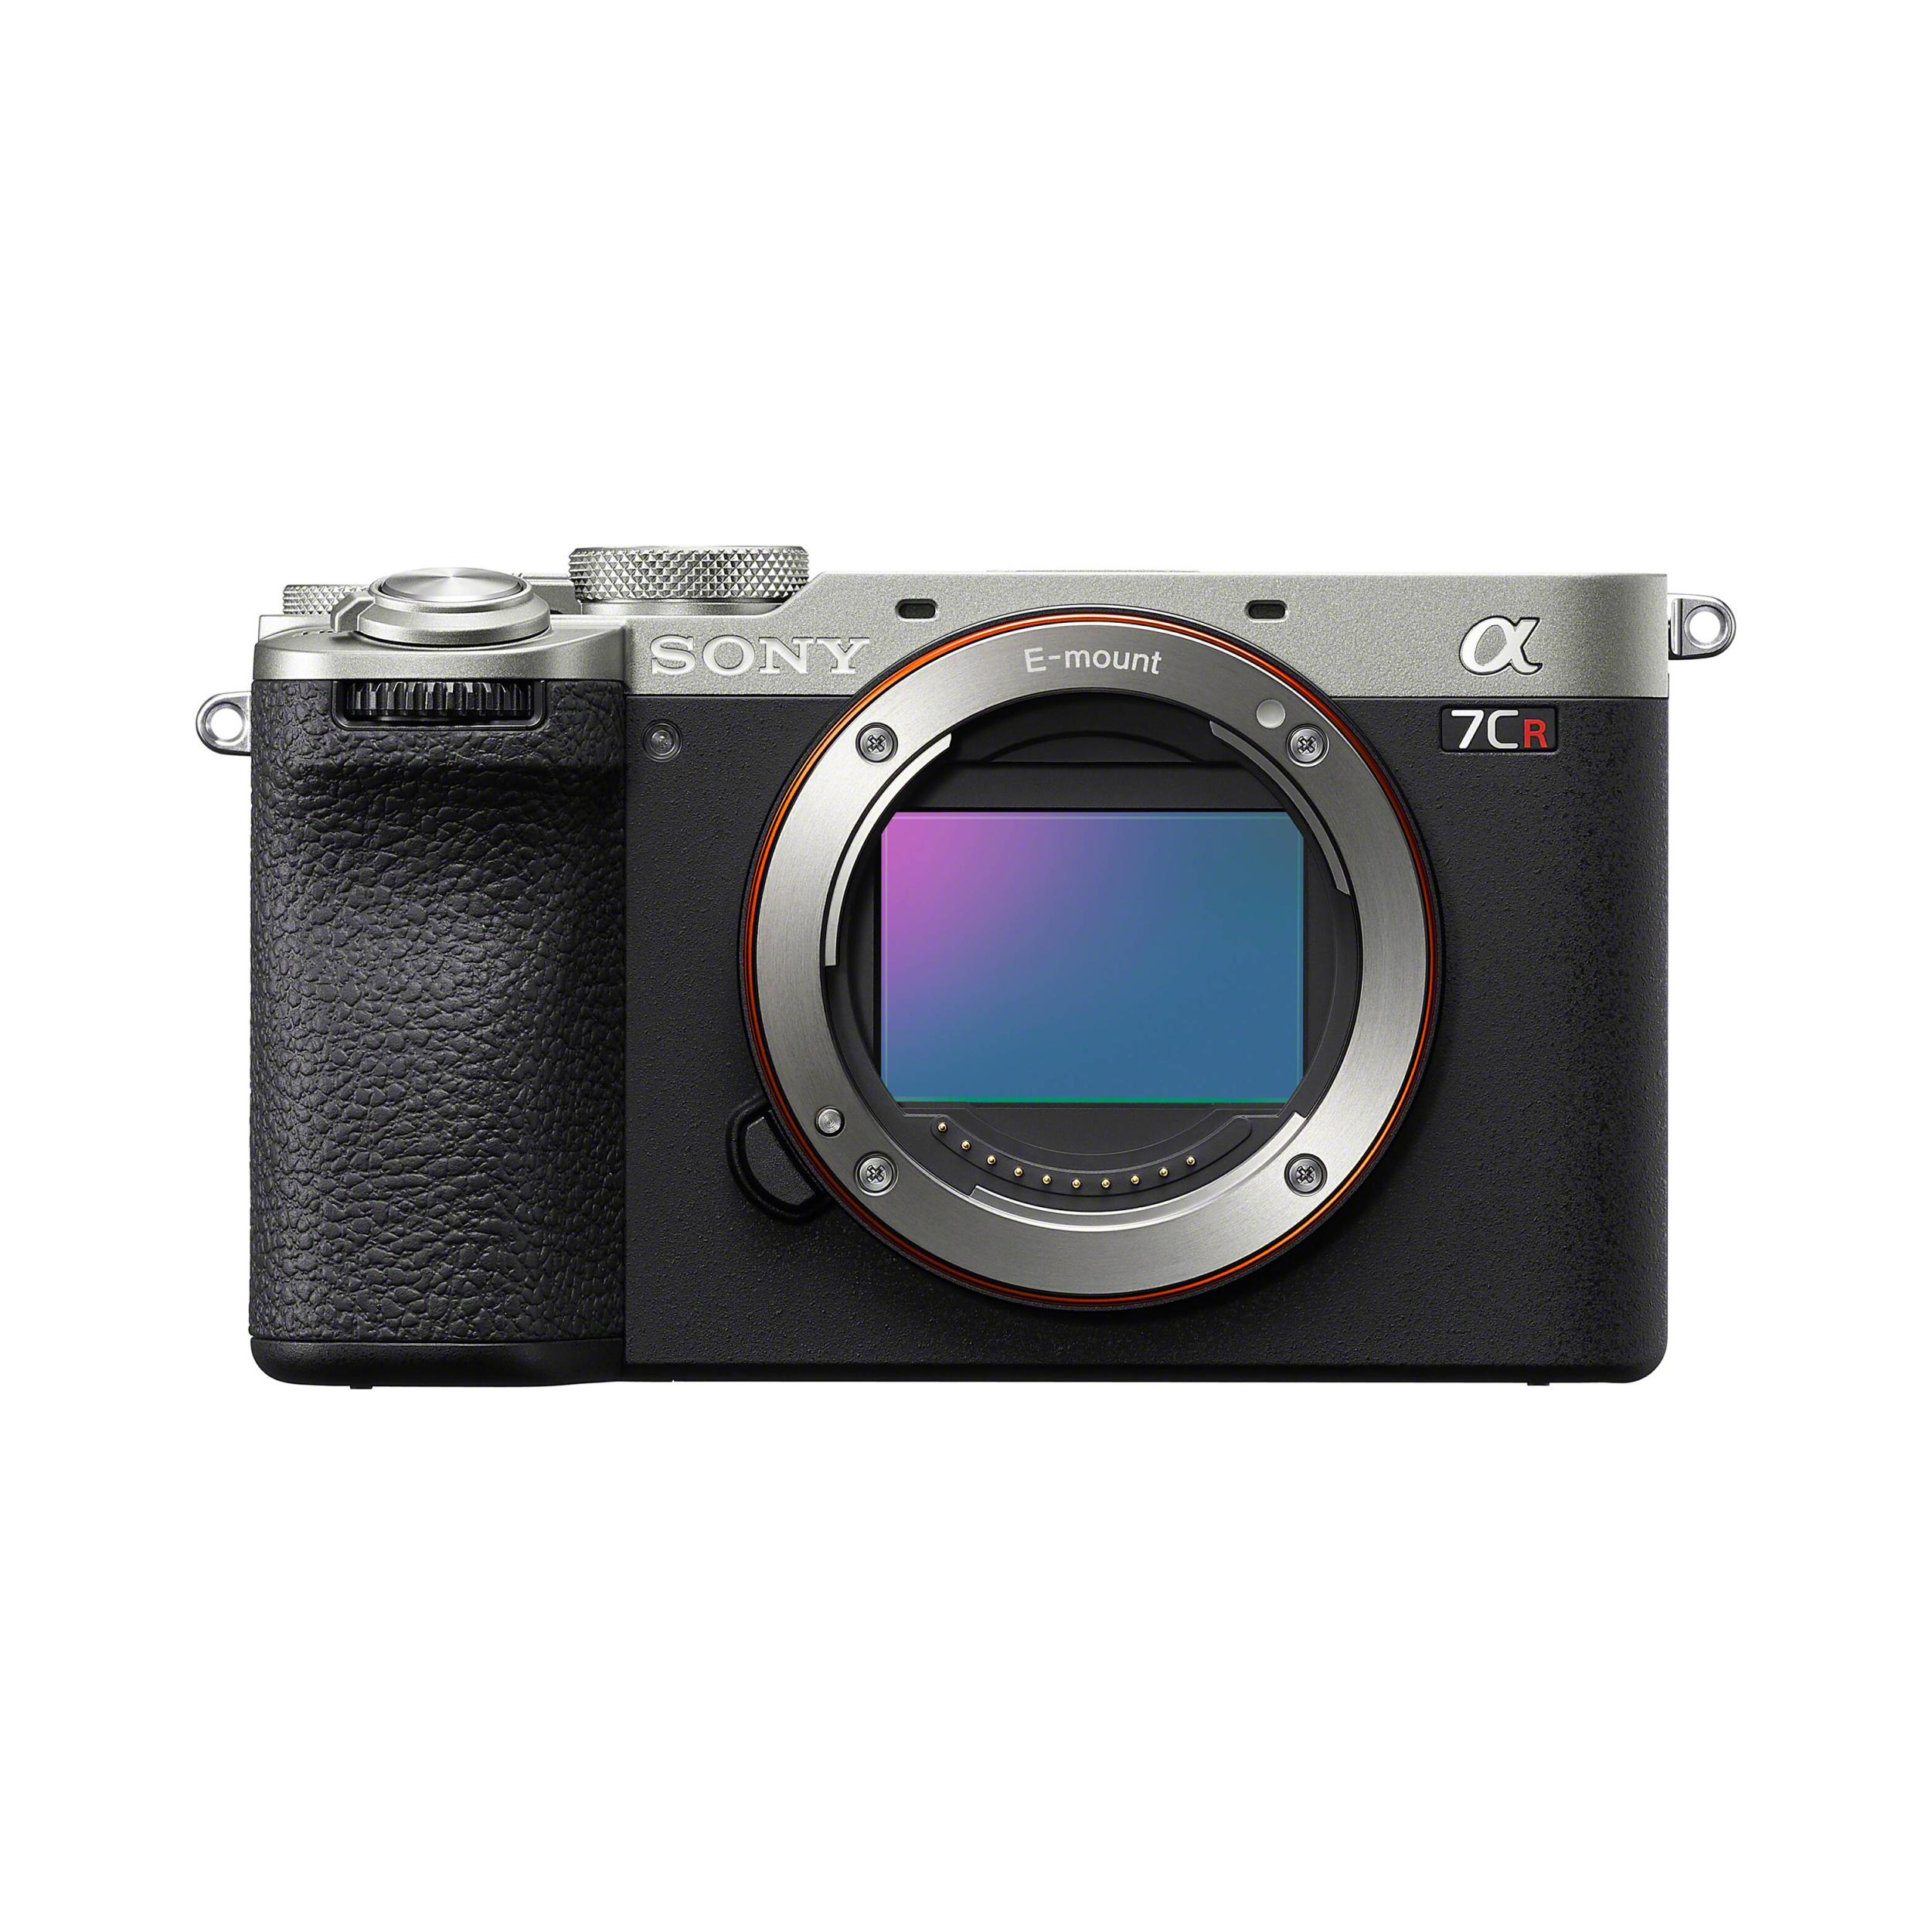 Sony A7C II review: Minor updates on the outside, big improvements inside